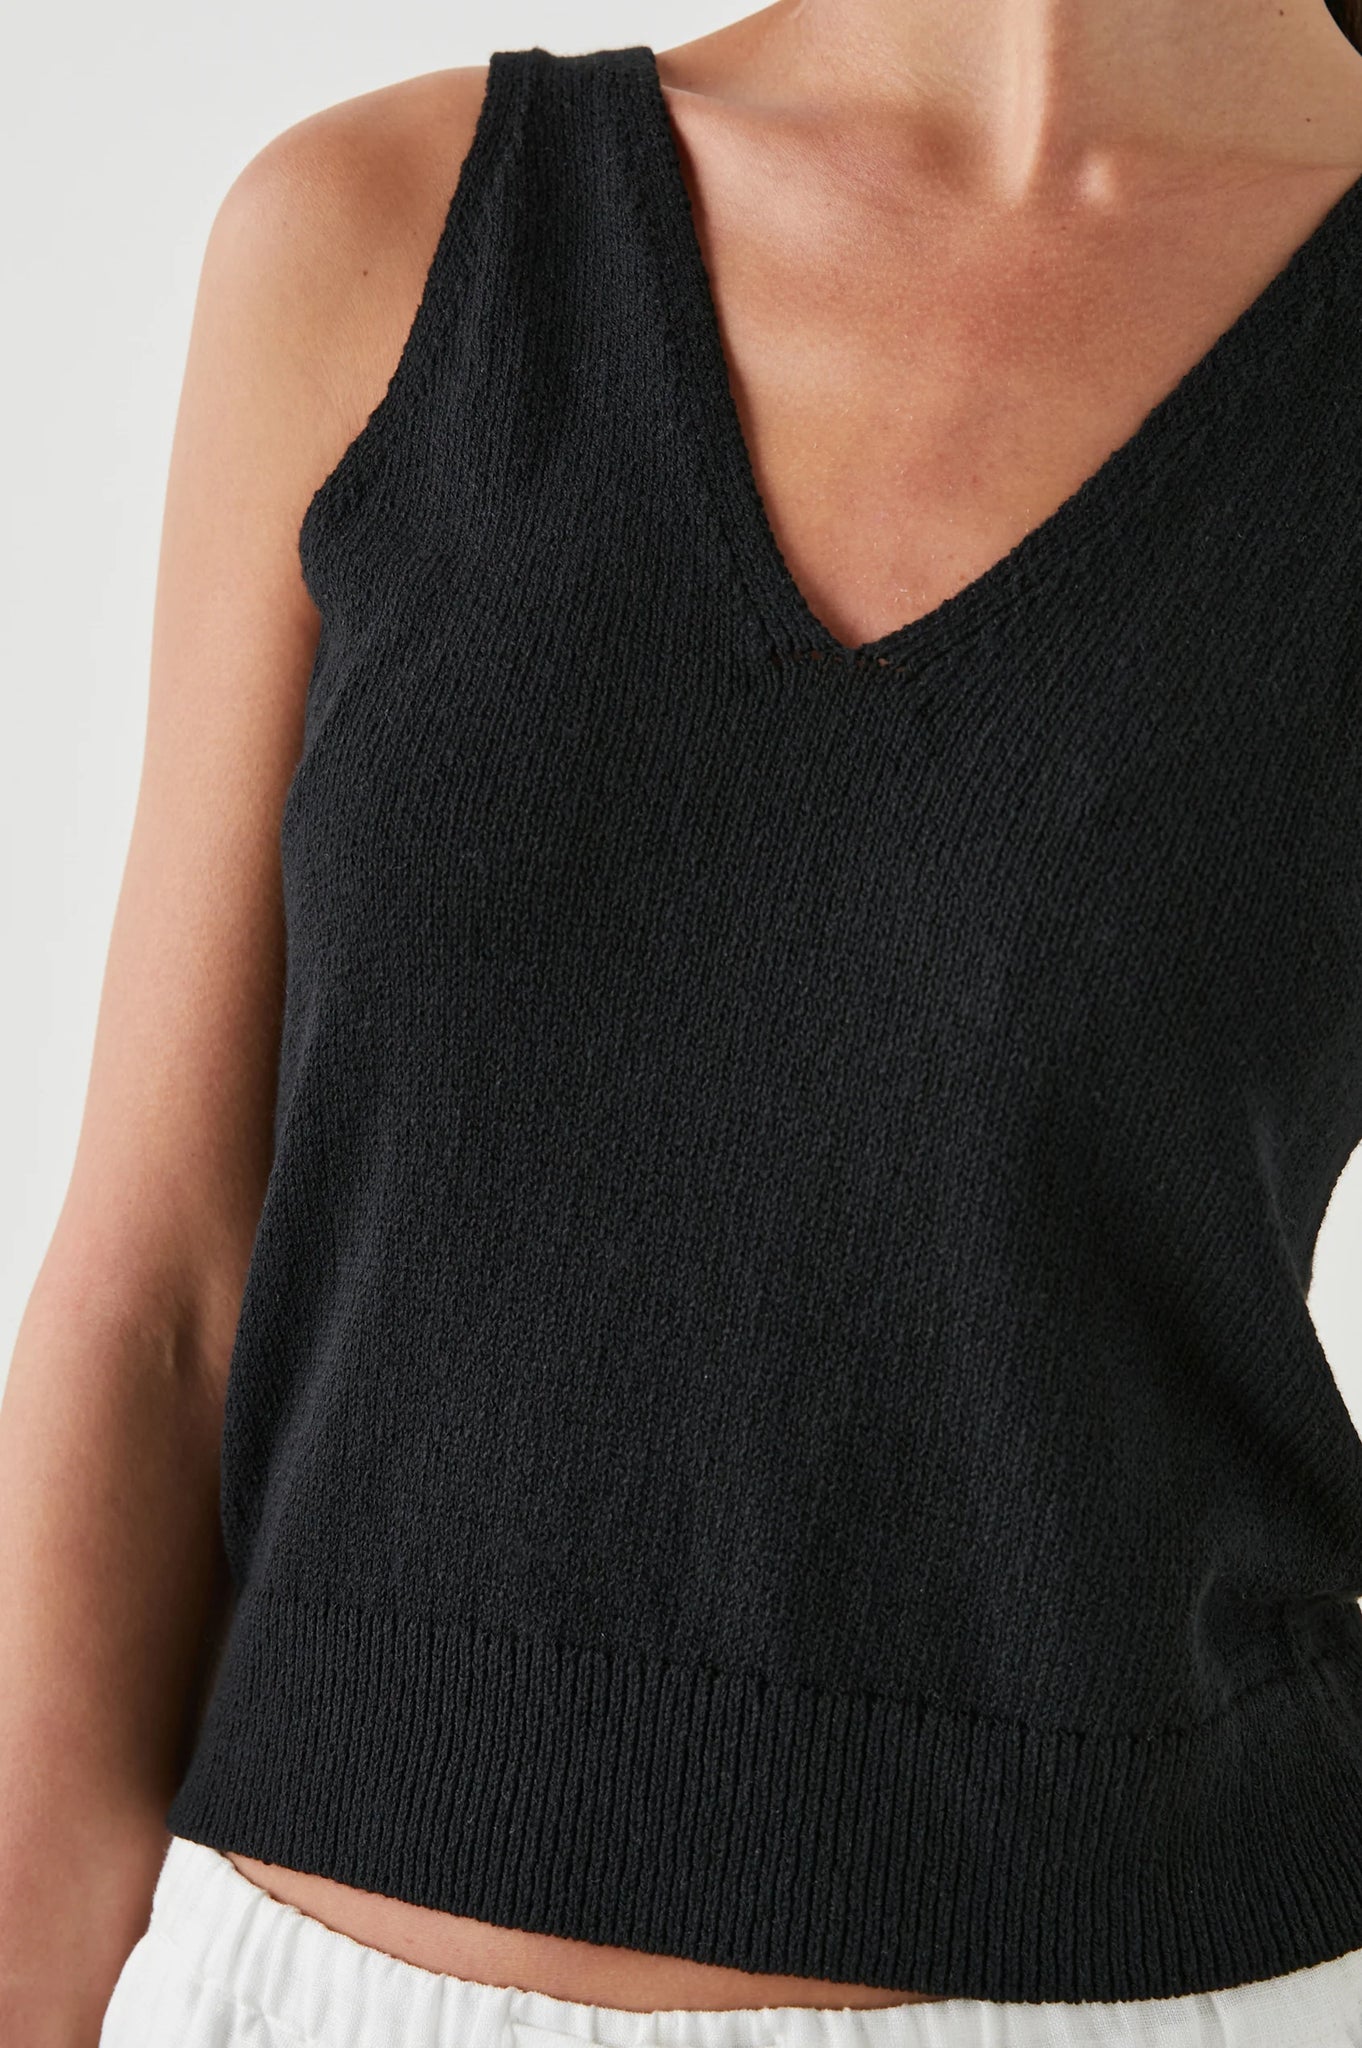 Maise Tank in Black